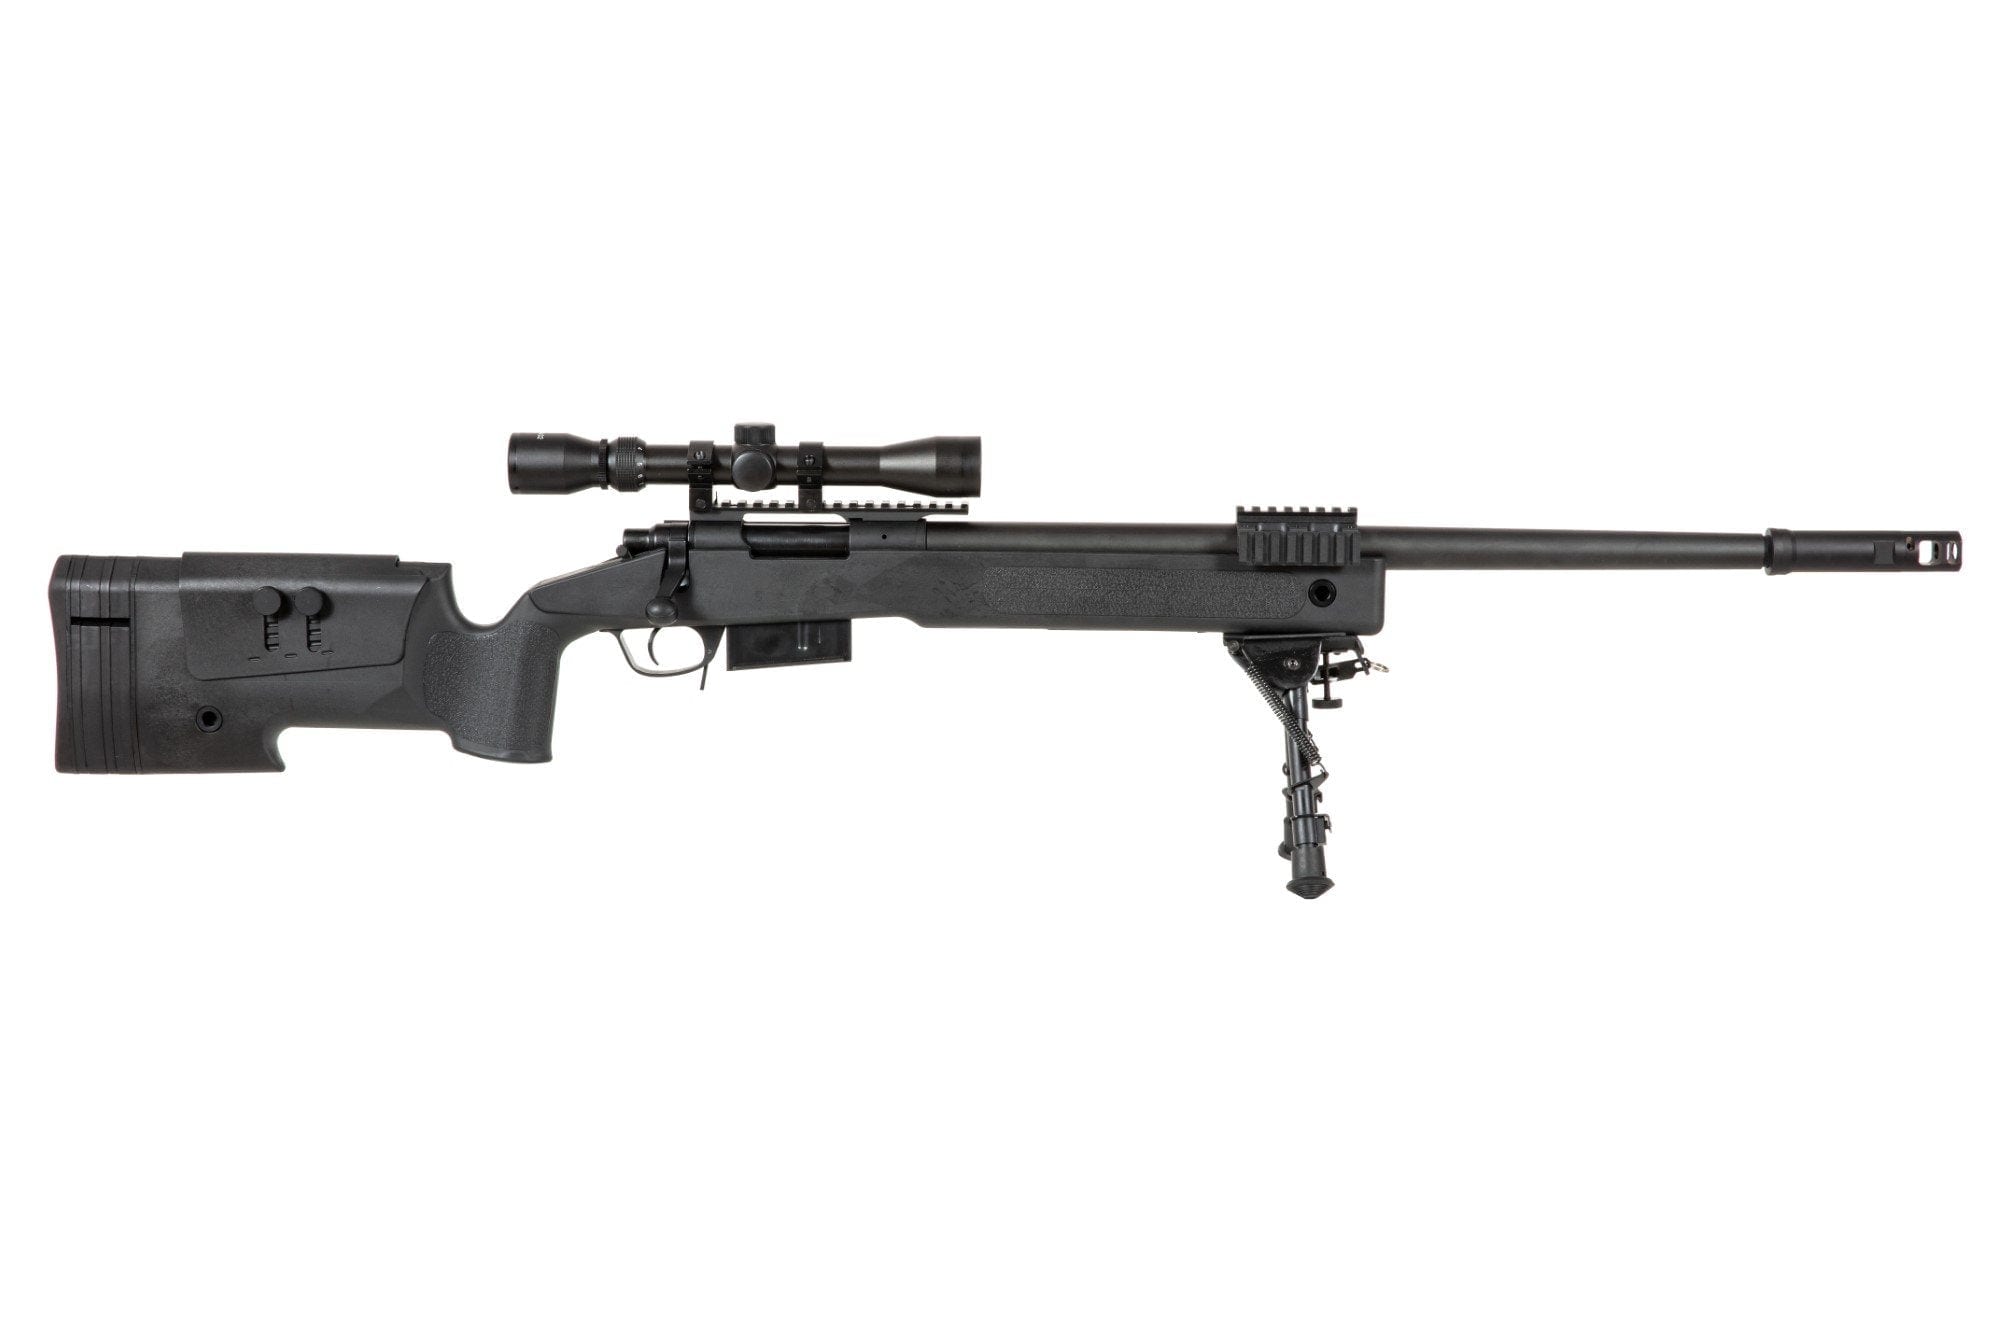 SA-CORE ™ S03 replica sniper rifle with scope and bipod - black by Specna Arms on Airsoft Mania Europe